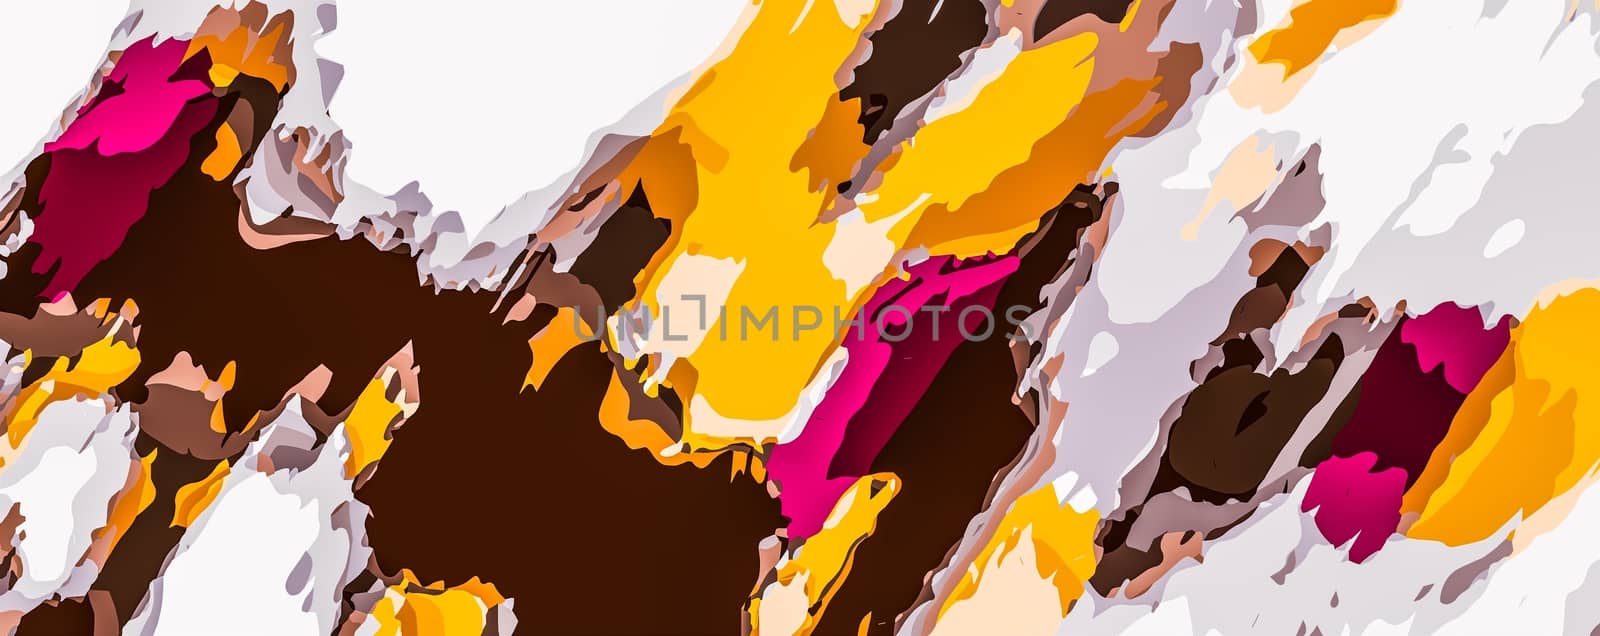 yellow brown and pink painting abstract background